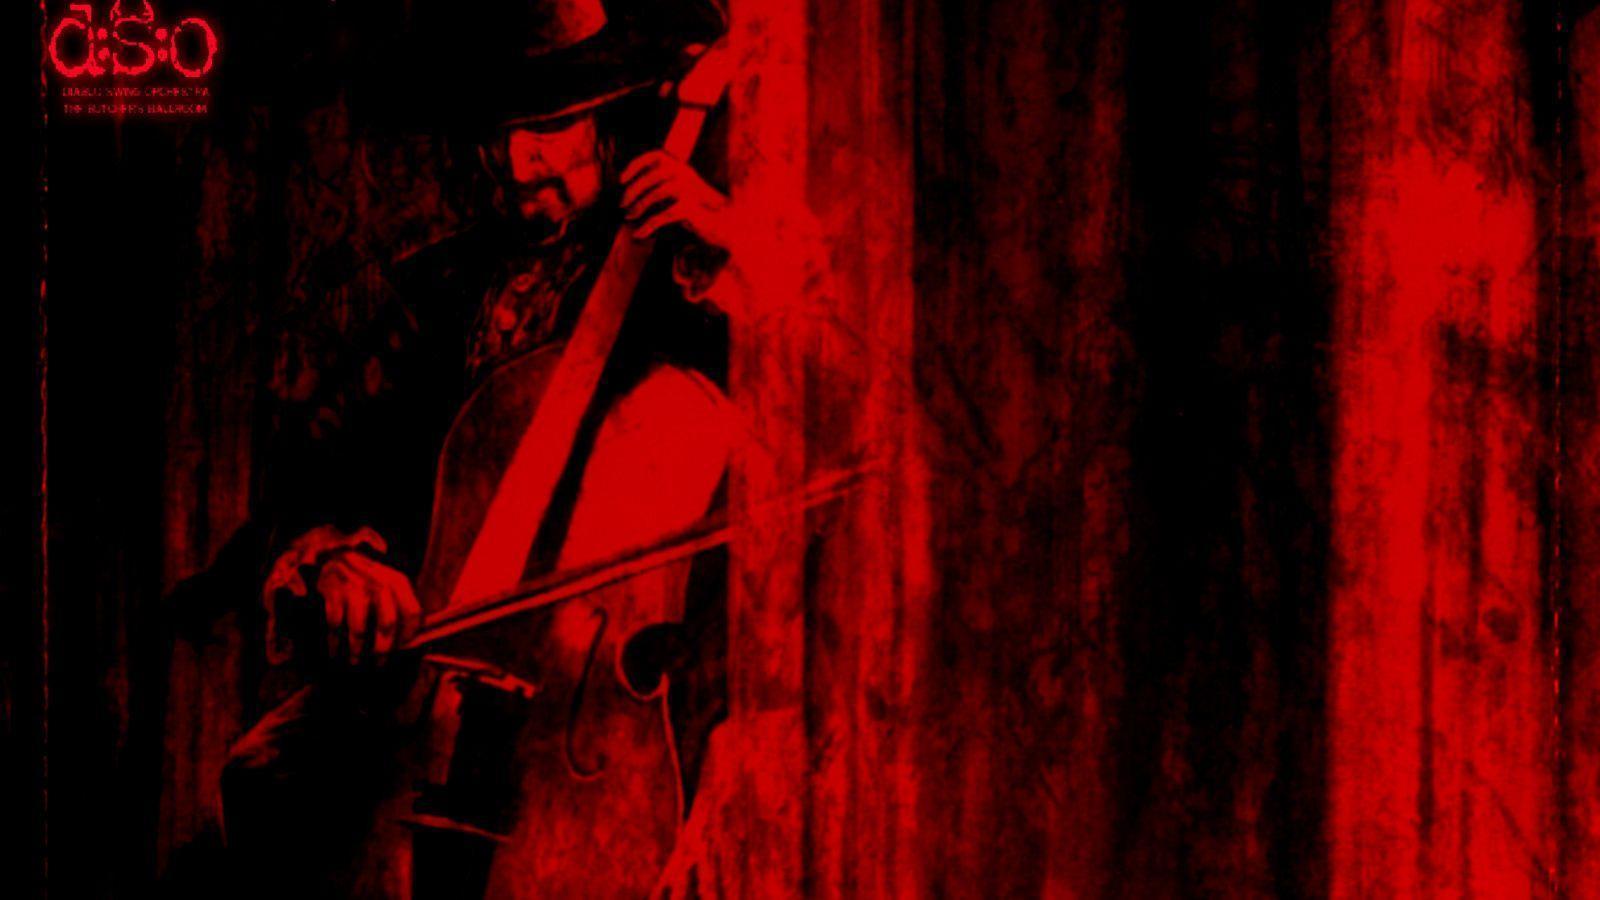 Diablo Swing Orchestra Wallpaper and Background Imagex900